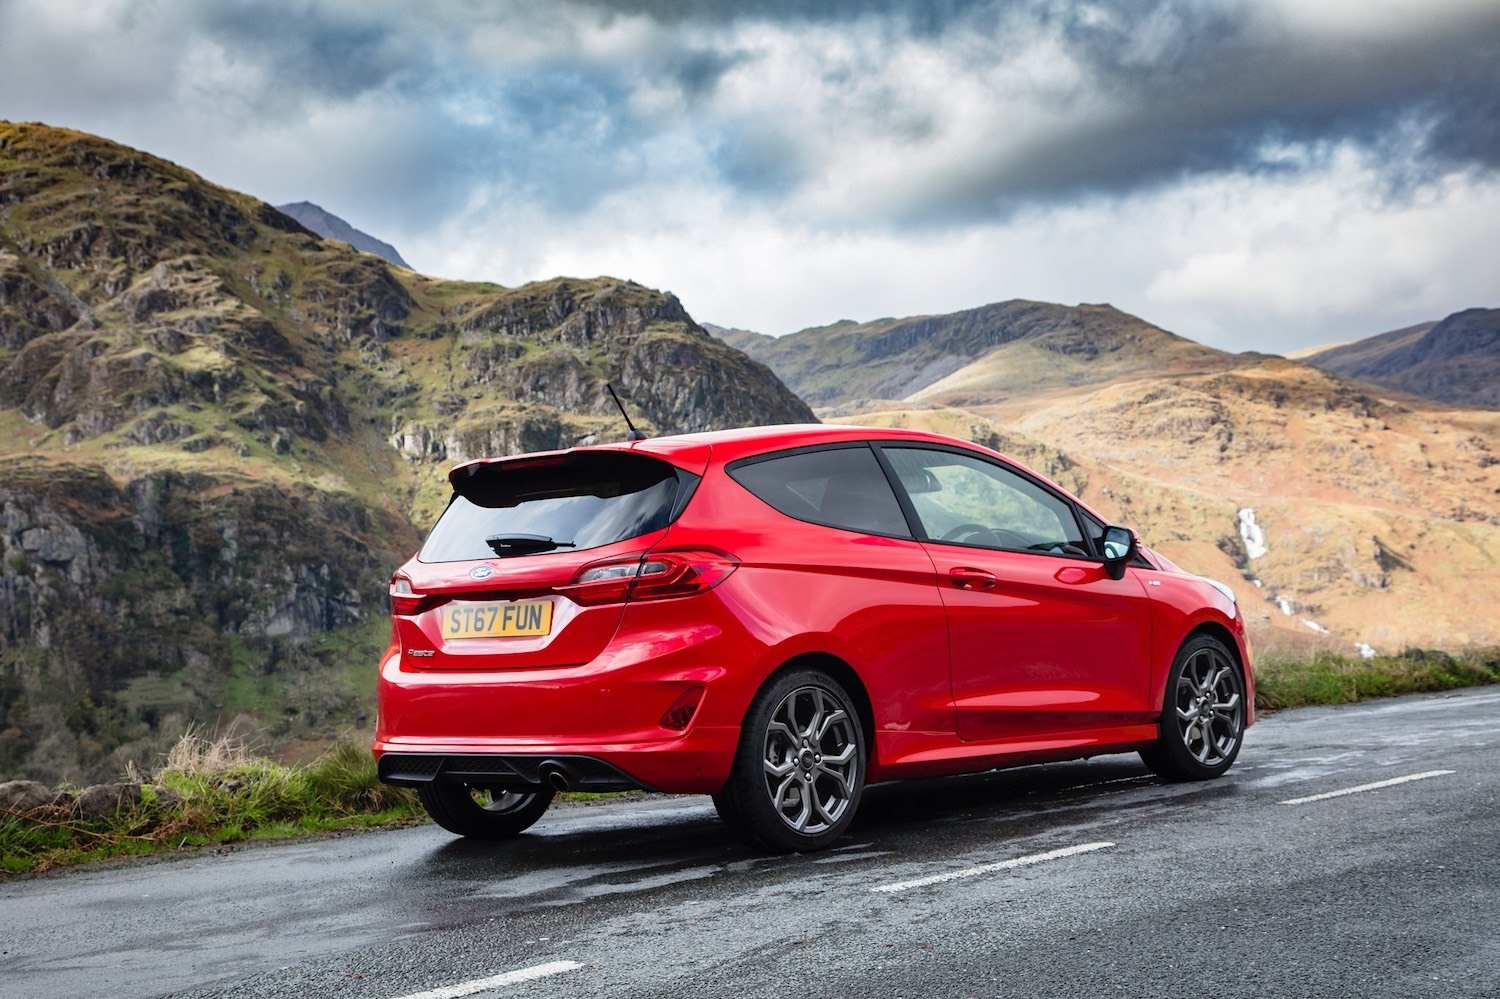 Neil Lyndon drives the All-New Ford Fiesta ST-Line 18